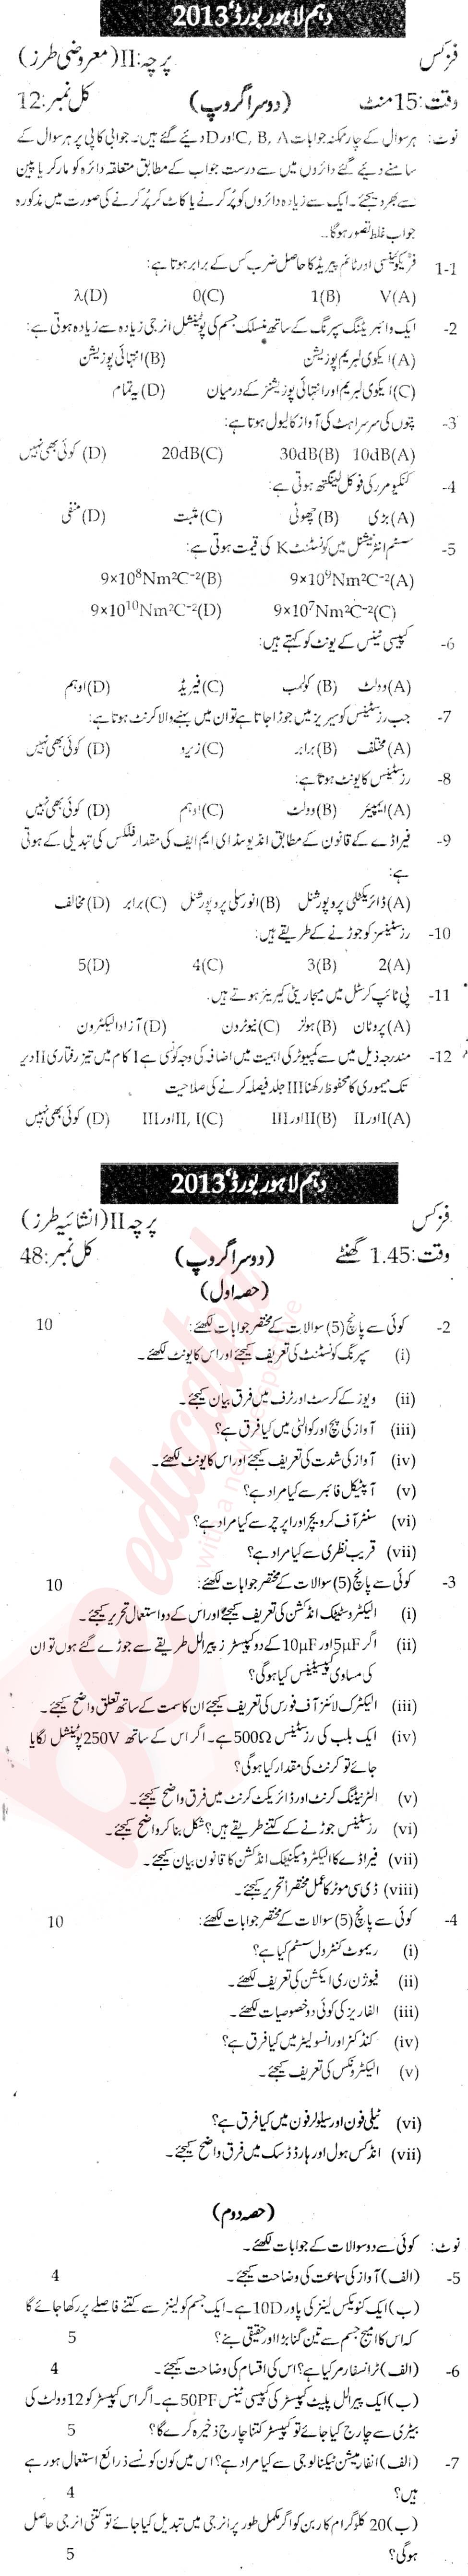 Physics 10th class Past Paper Group 2 BISE Lahore 2013